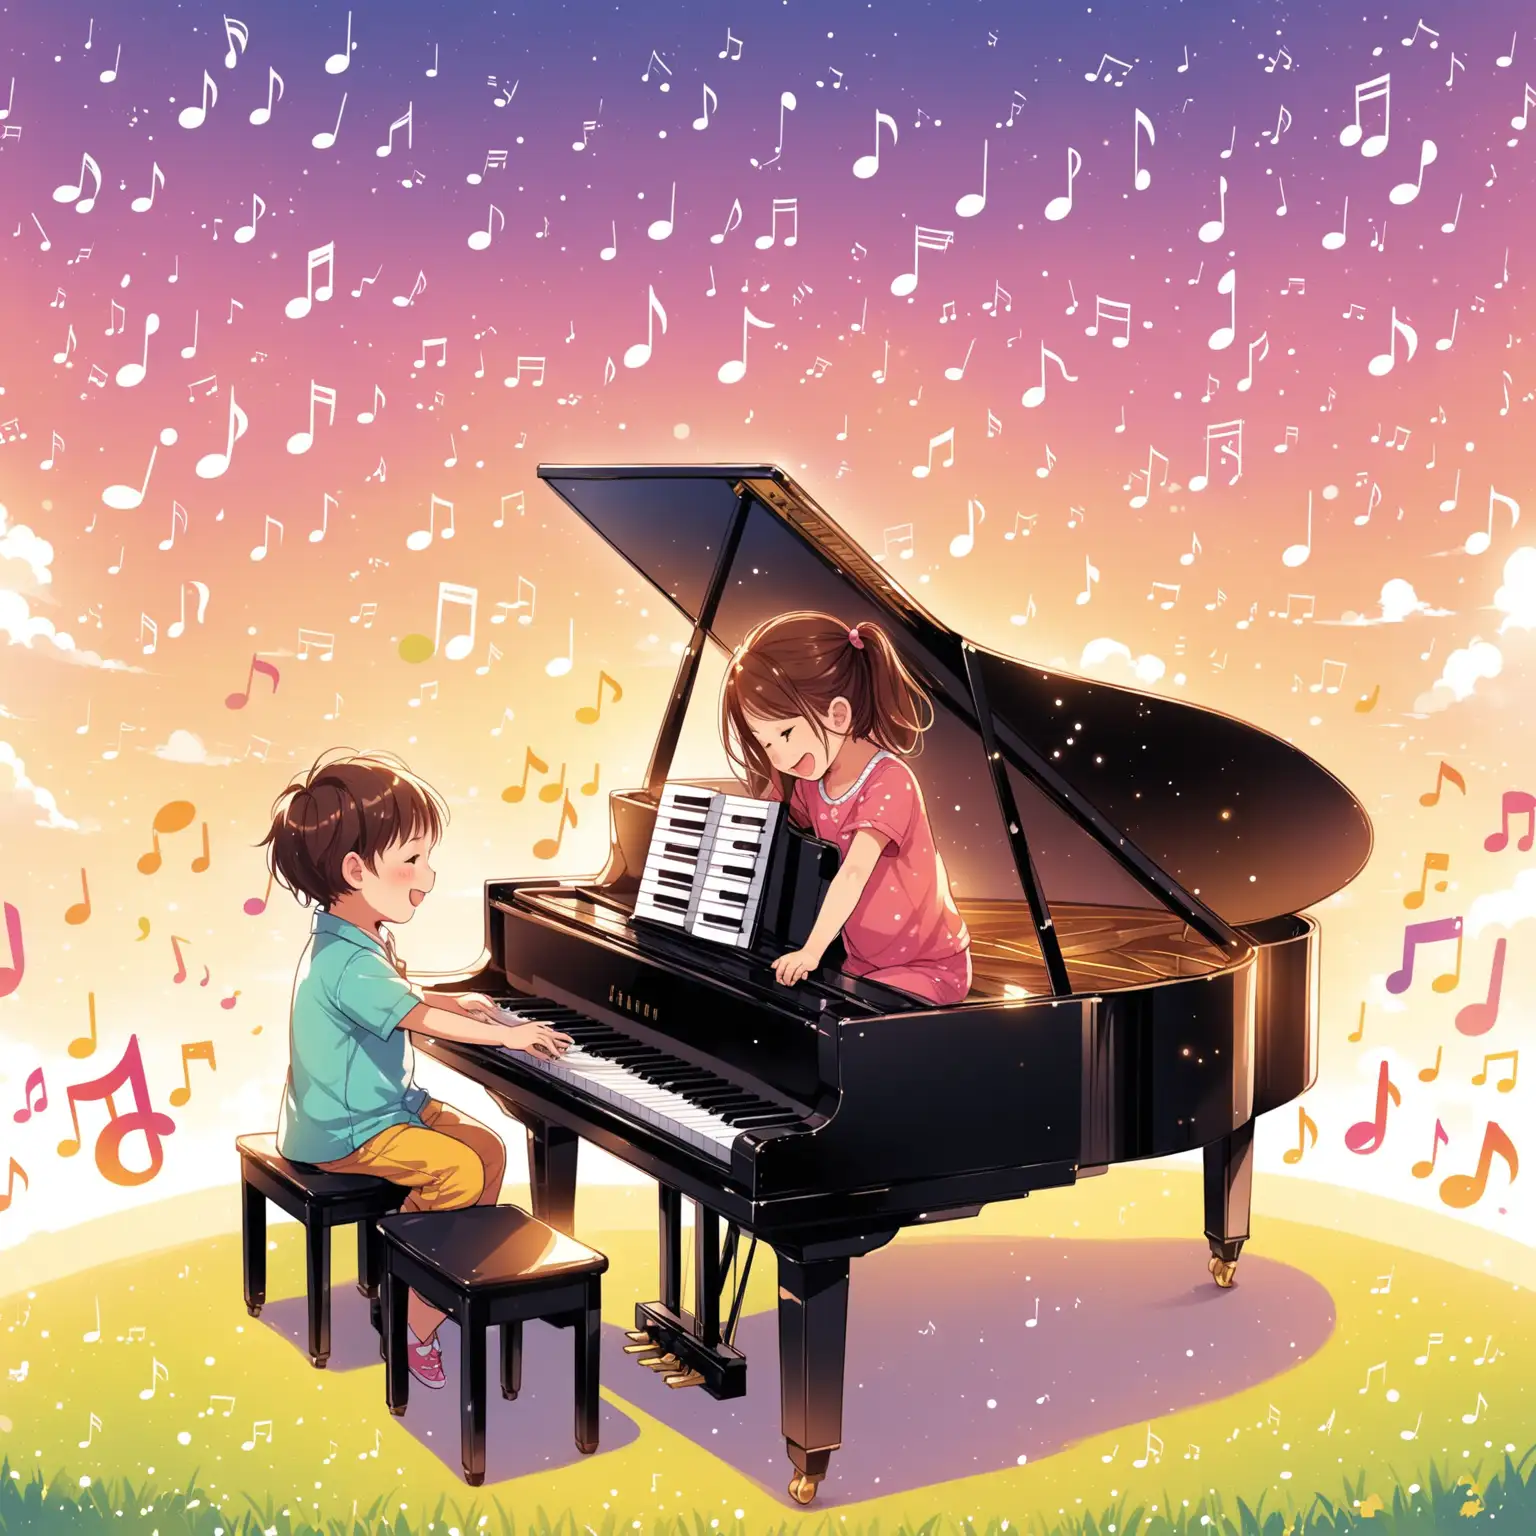 Joyful Children Playing Pianos Amidst Floating Music Notes